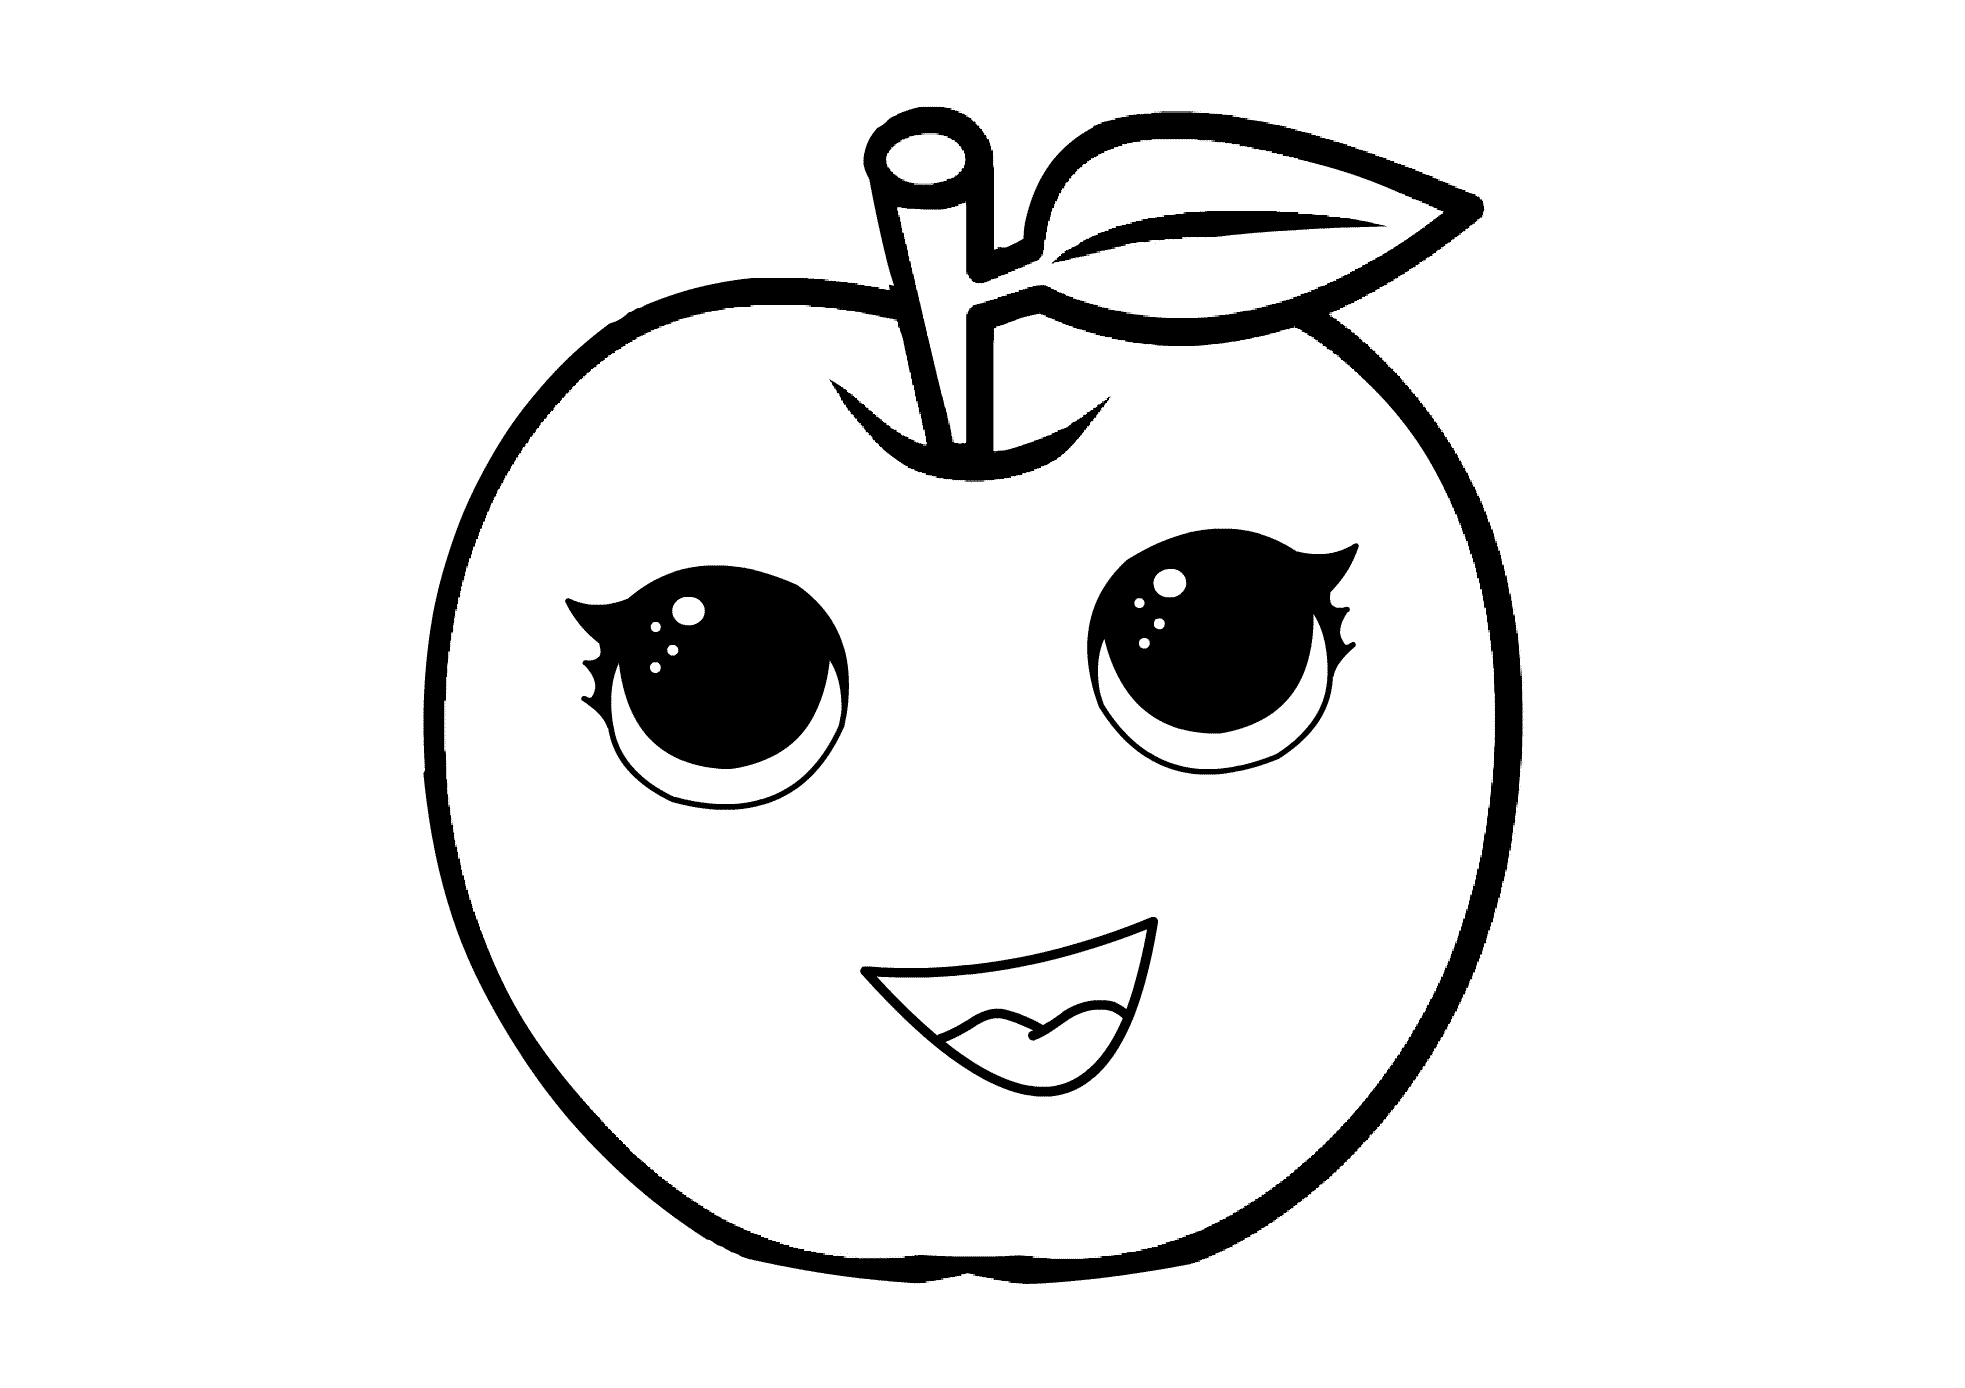 Download Printable Apple Coloring Pages: Easy Fruits PDFs - Print ...